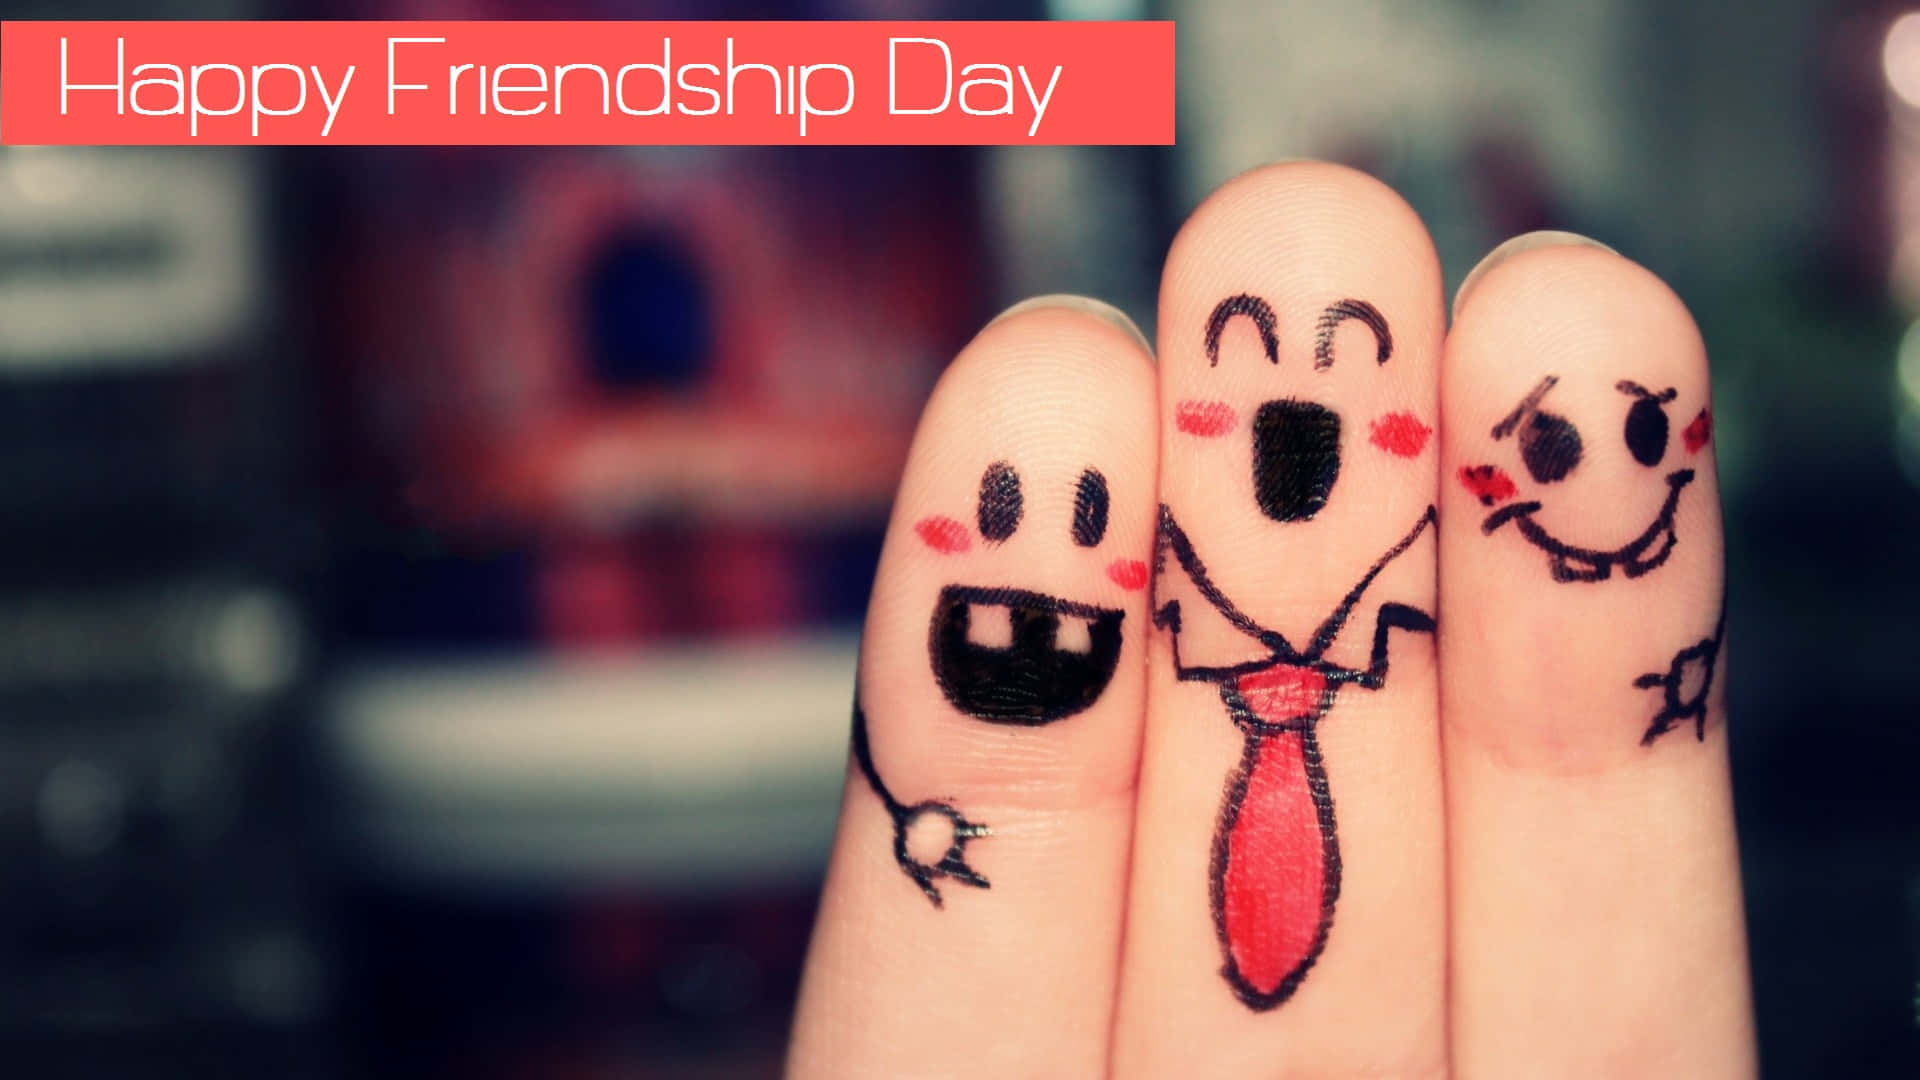 Celebrate the Power of Friendship!